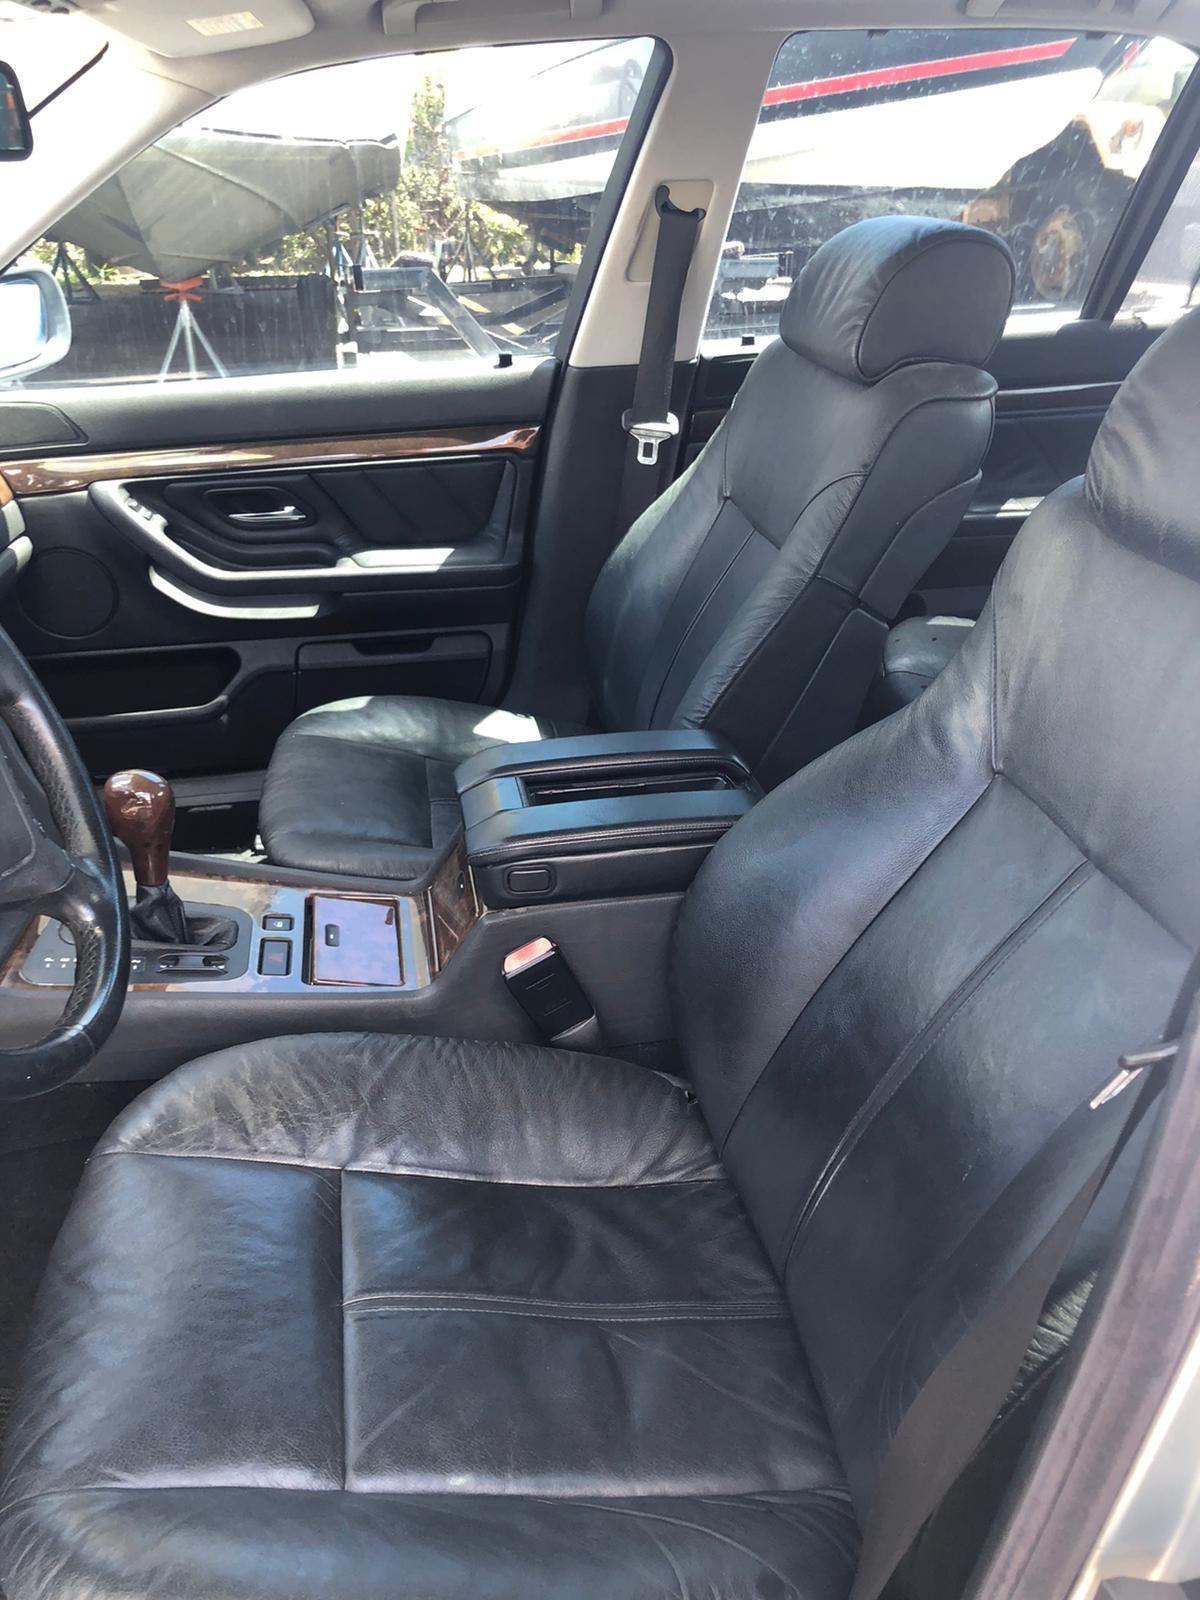 1998 BMW 740i, it has title and it runs.